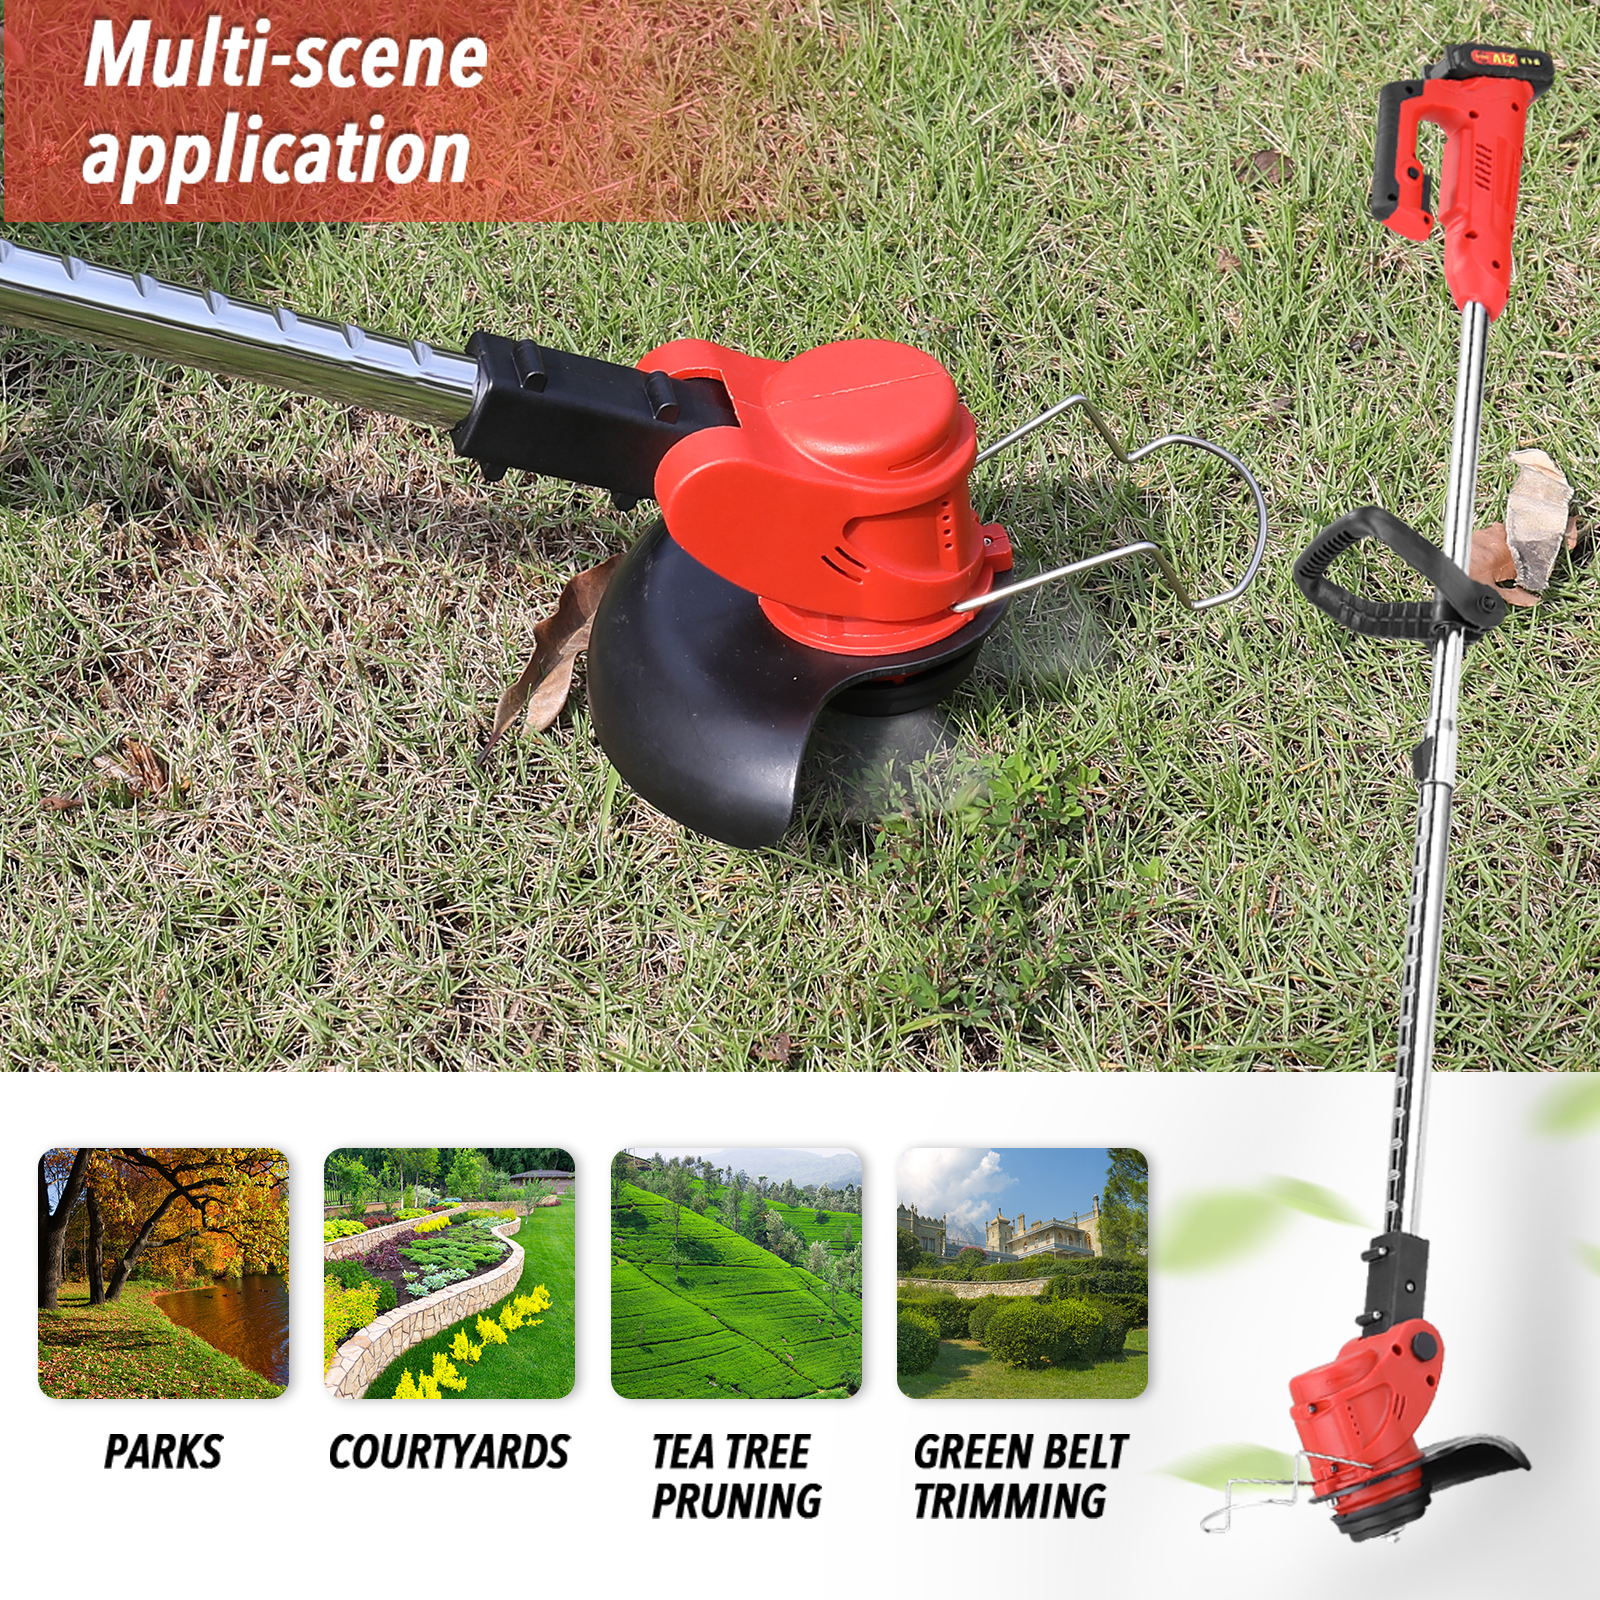 21V Electric Lawn Mower Cordless Household Grass Cutter Trimmer Brush Cutter Portable Pruning Garden Tool